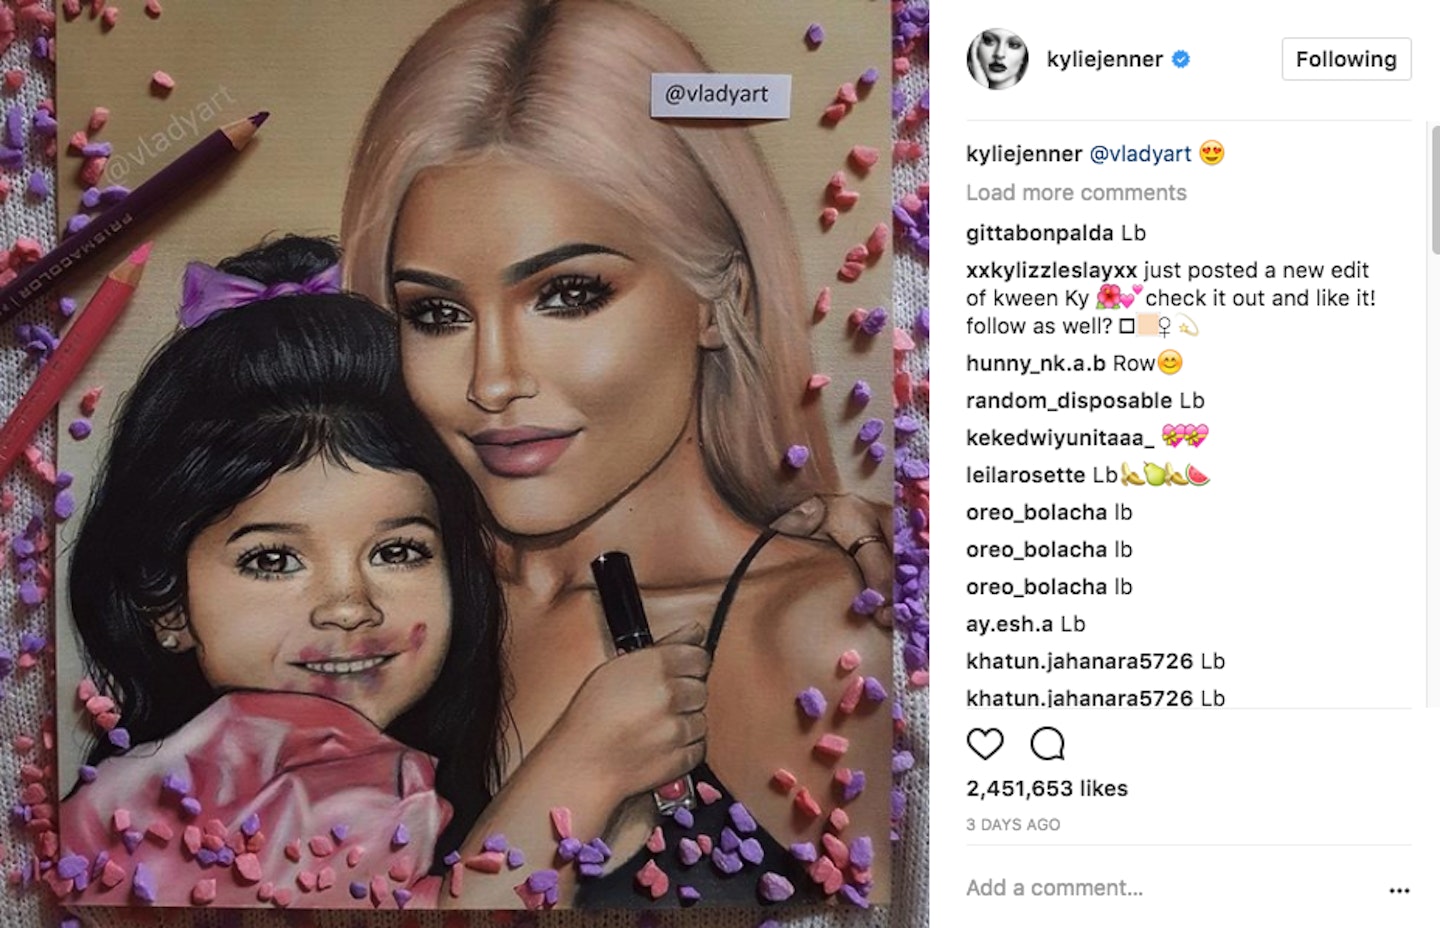 Kylie Jenner posted fan art of her with her younger self